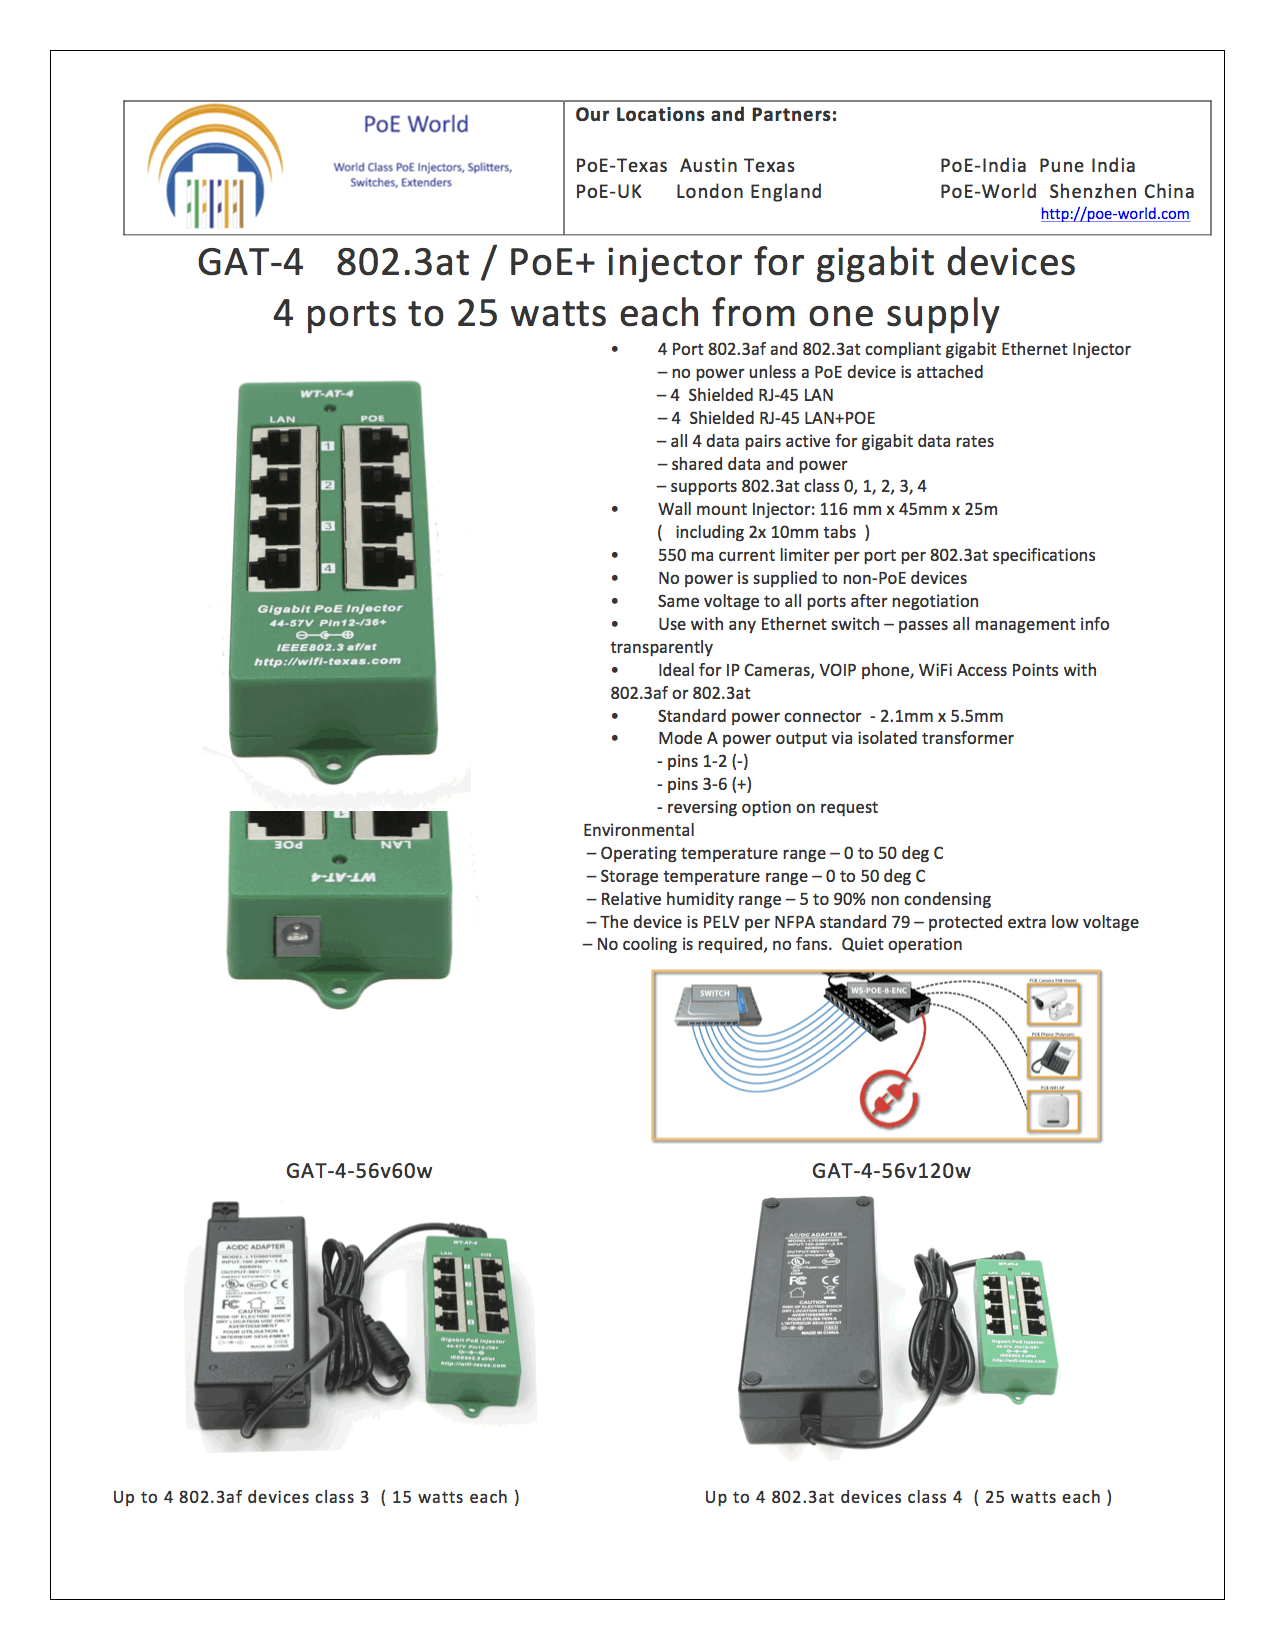 AT-4 Active Gigabit PoE+ Injector IEEE802.3at Mode A Power Over Ethernet Injector -Not Include Power Supply